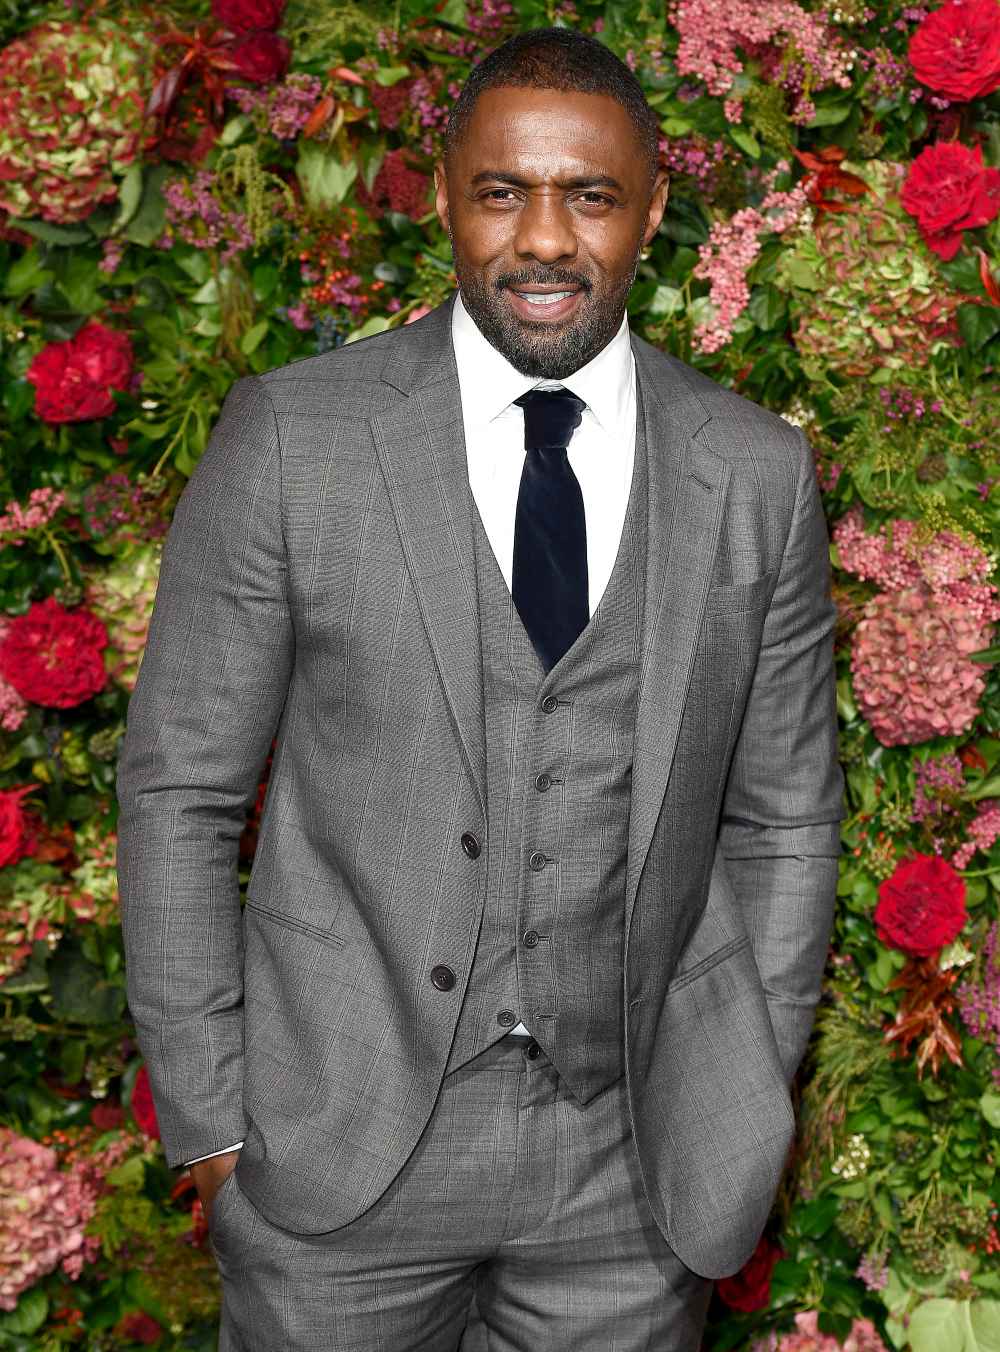 Cats Idris Elba Doesn’t Know What the Musicals About